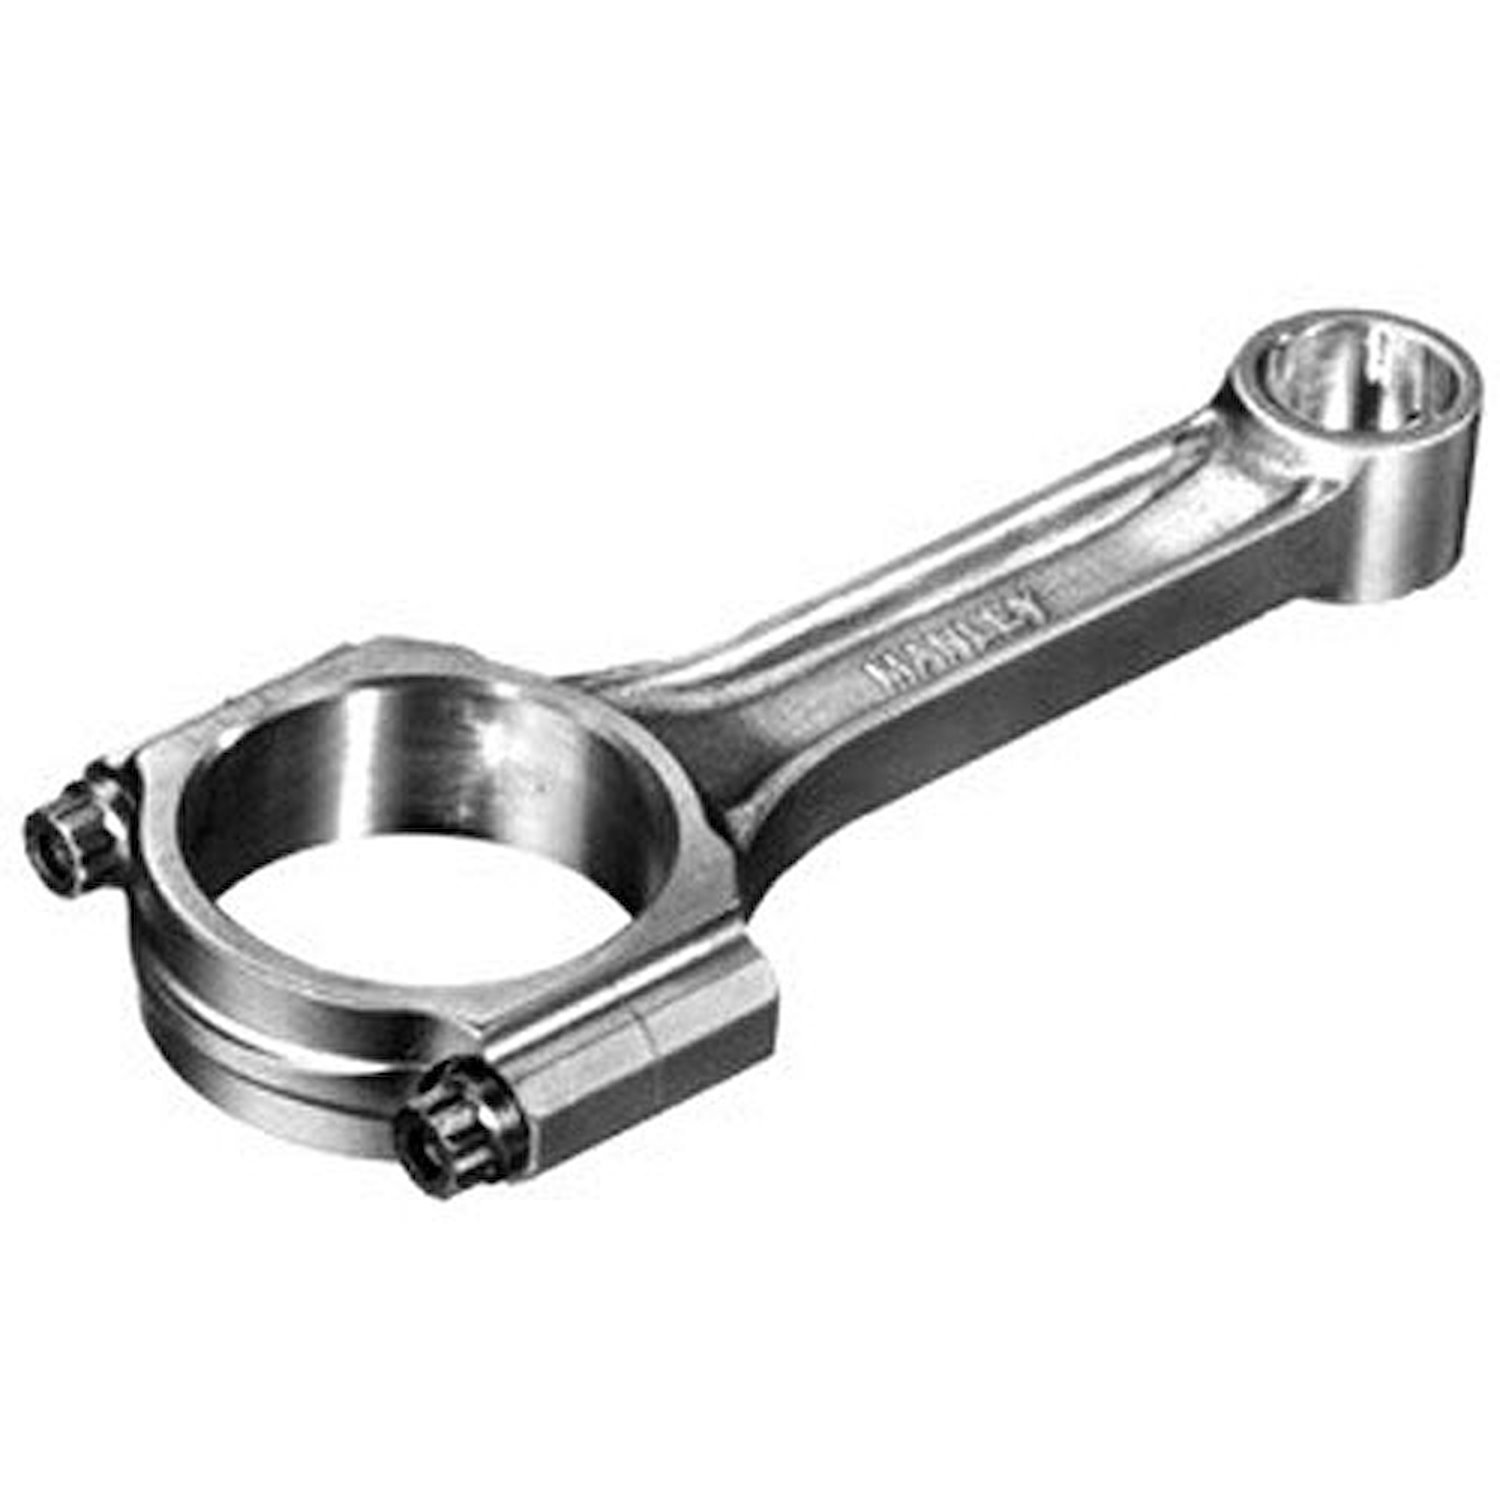 Sportsmaster Connecting Rods Center-to-Center: 5.850"